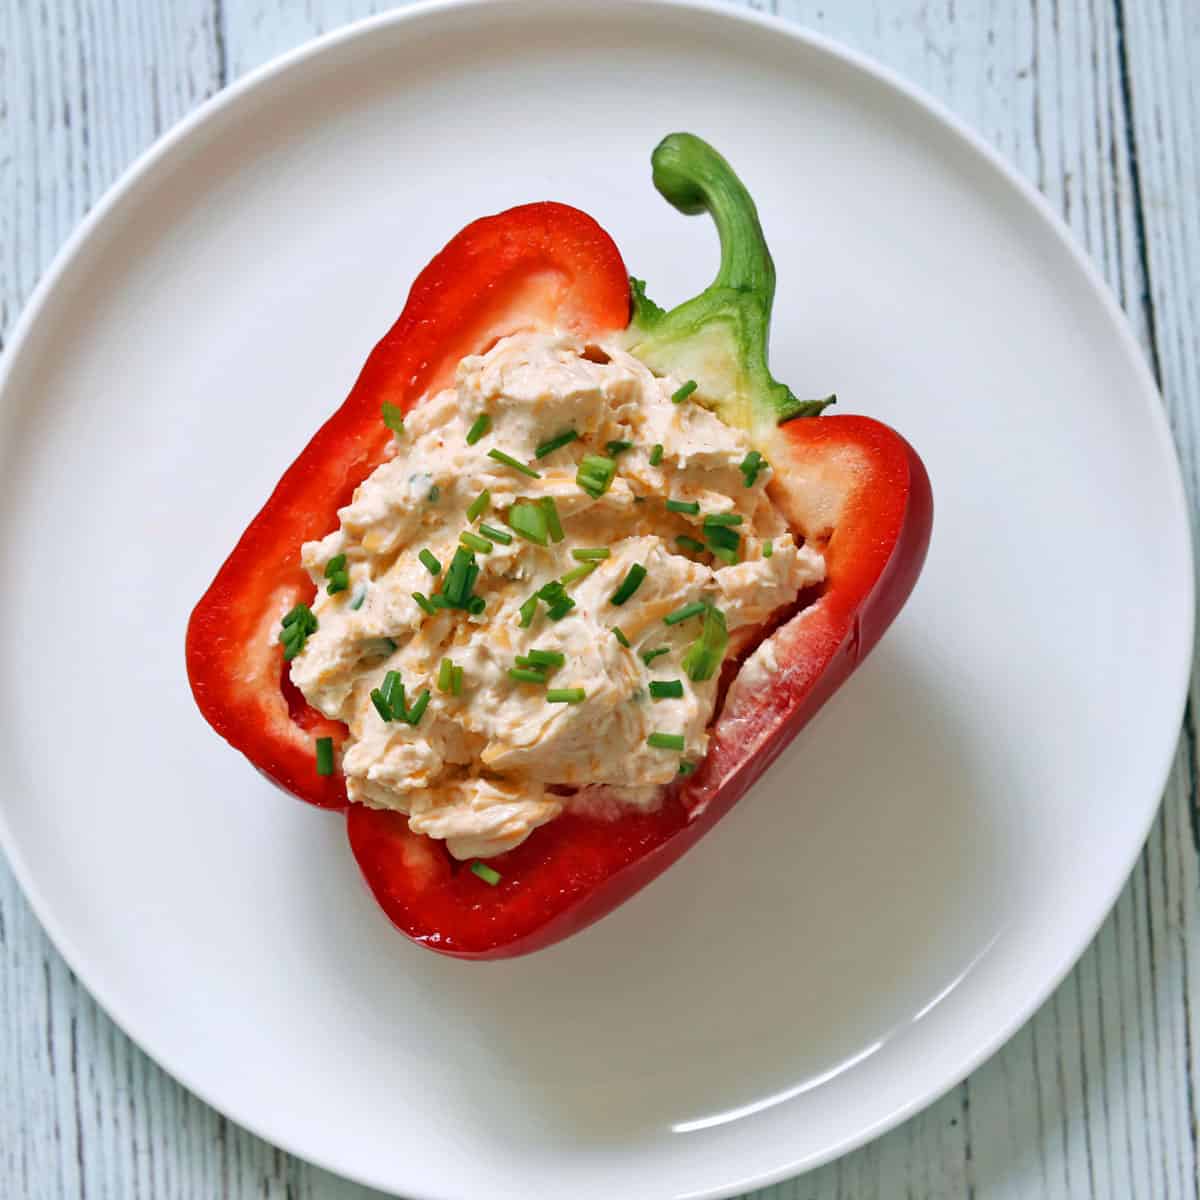 A halved bell pepper is stuffed with cream cheese dip.